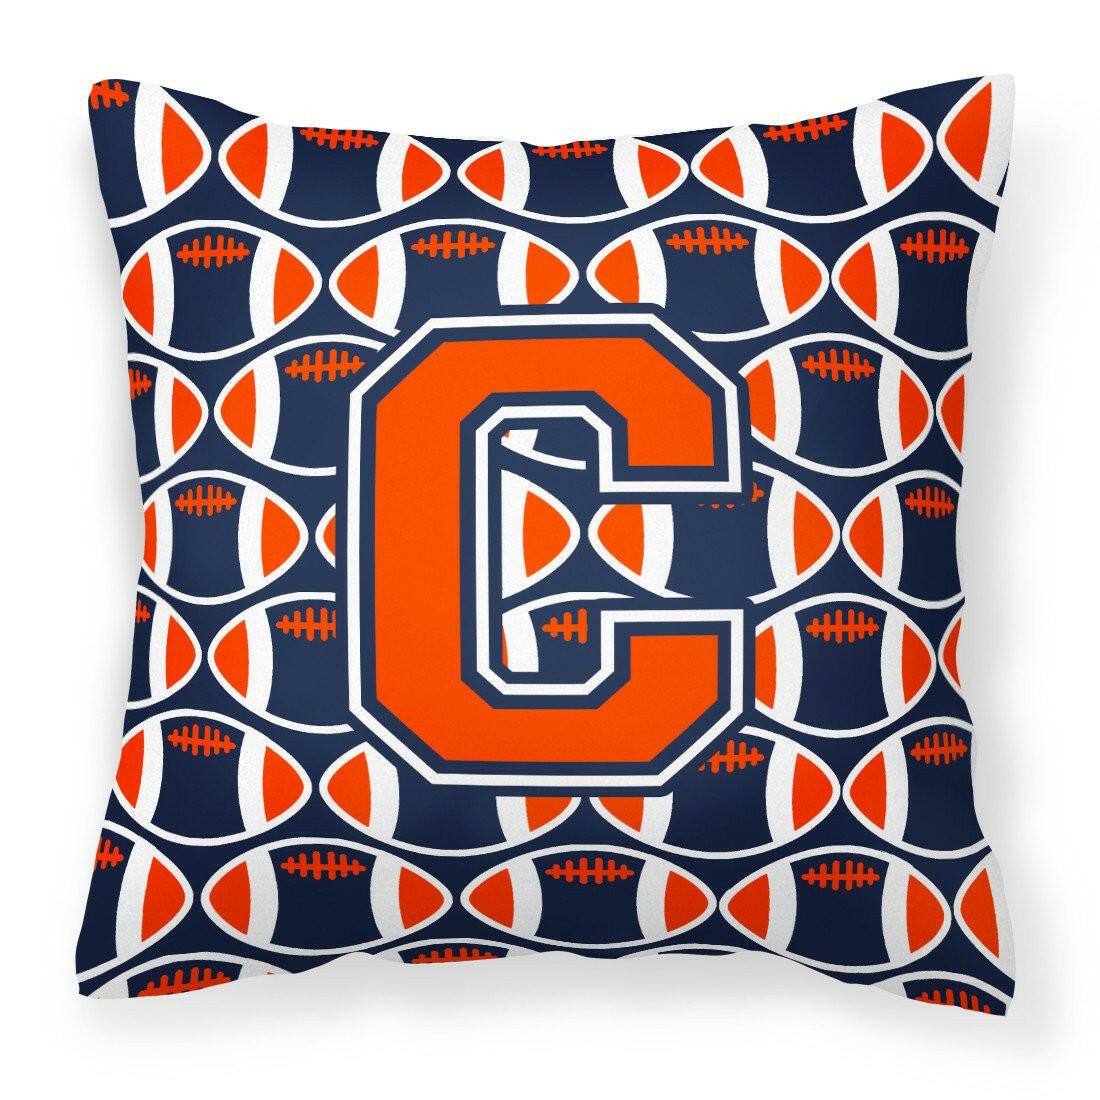 Letter C Football Orange, Blue and white Fabric Decorative Pillow CJ1066-CPW1414 by Caroline's Treasures